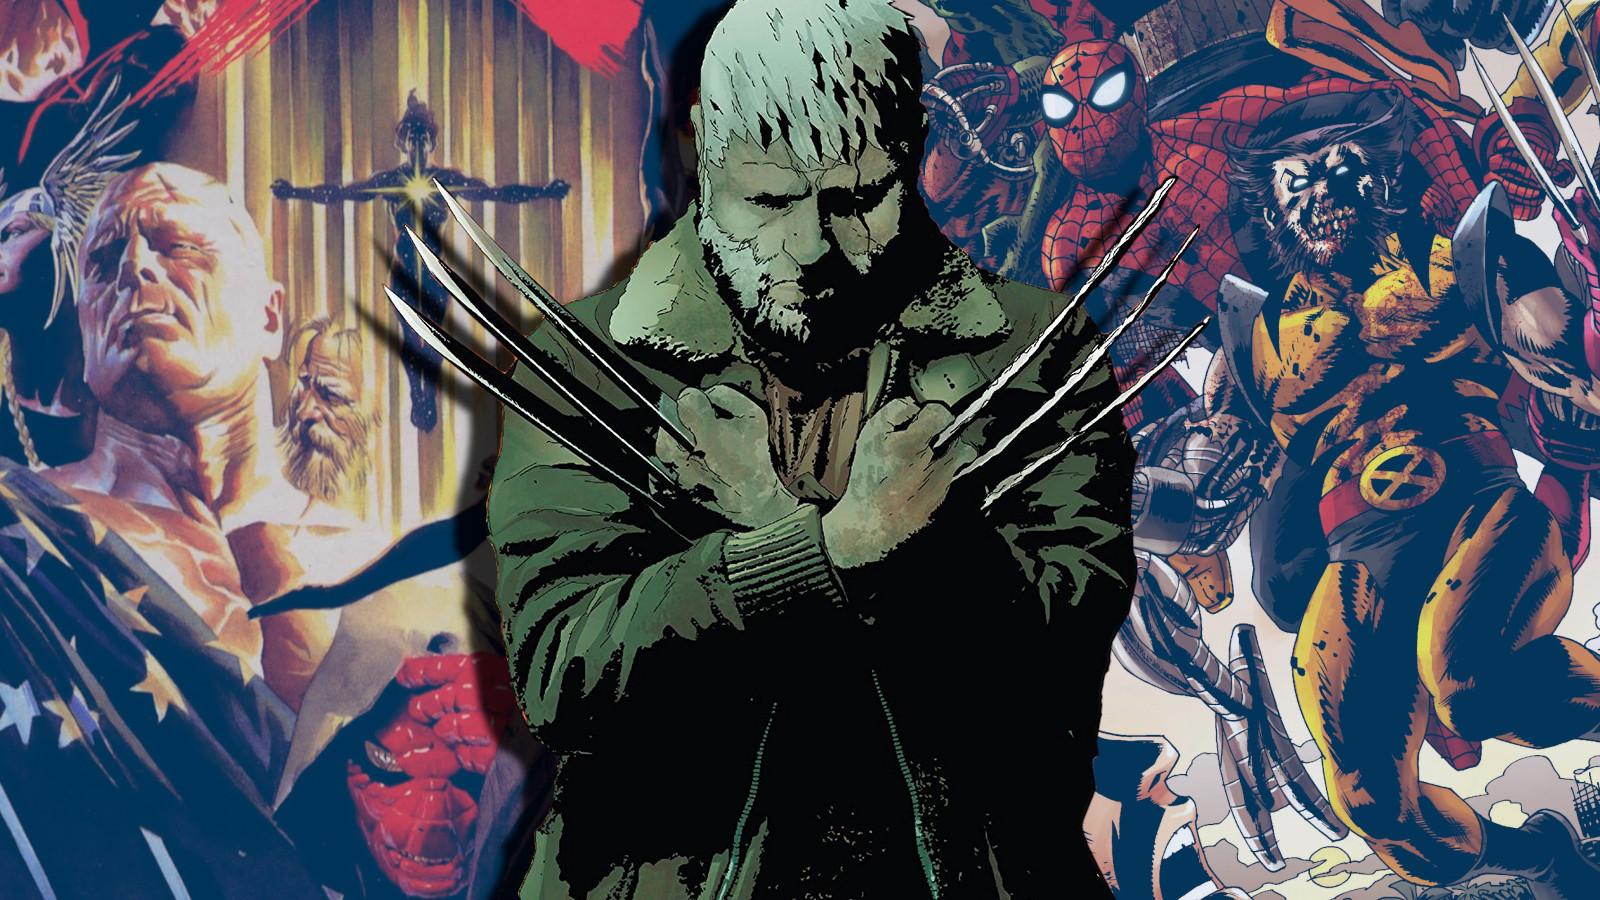 Earth X, Old Man Logan, and Marvel Zombies